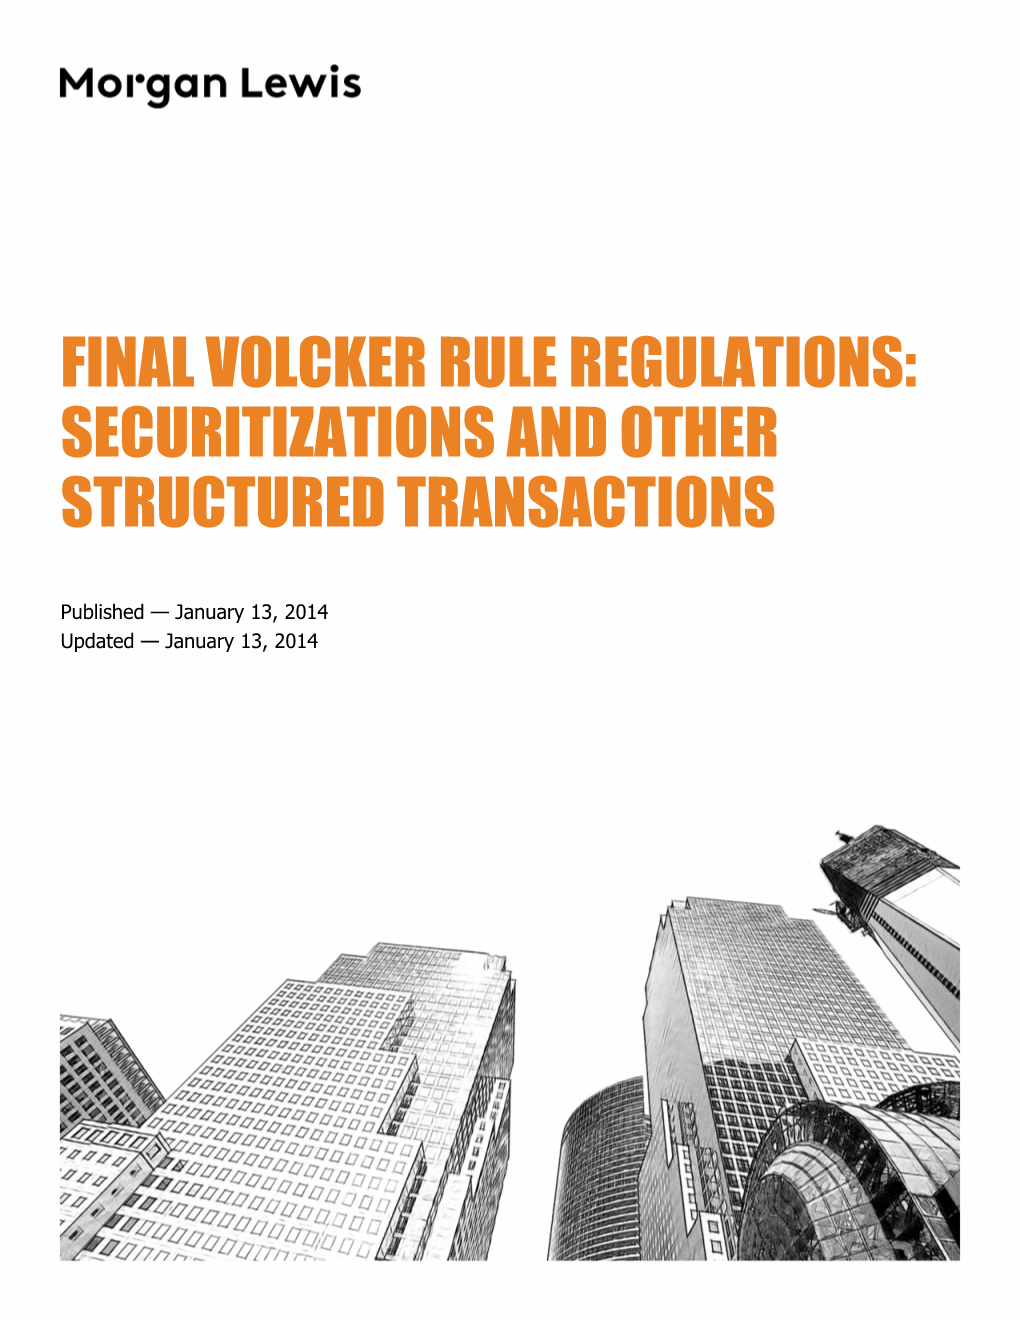 Final Volcker Rule Regulations: Securitizations and Other Structured Transactions